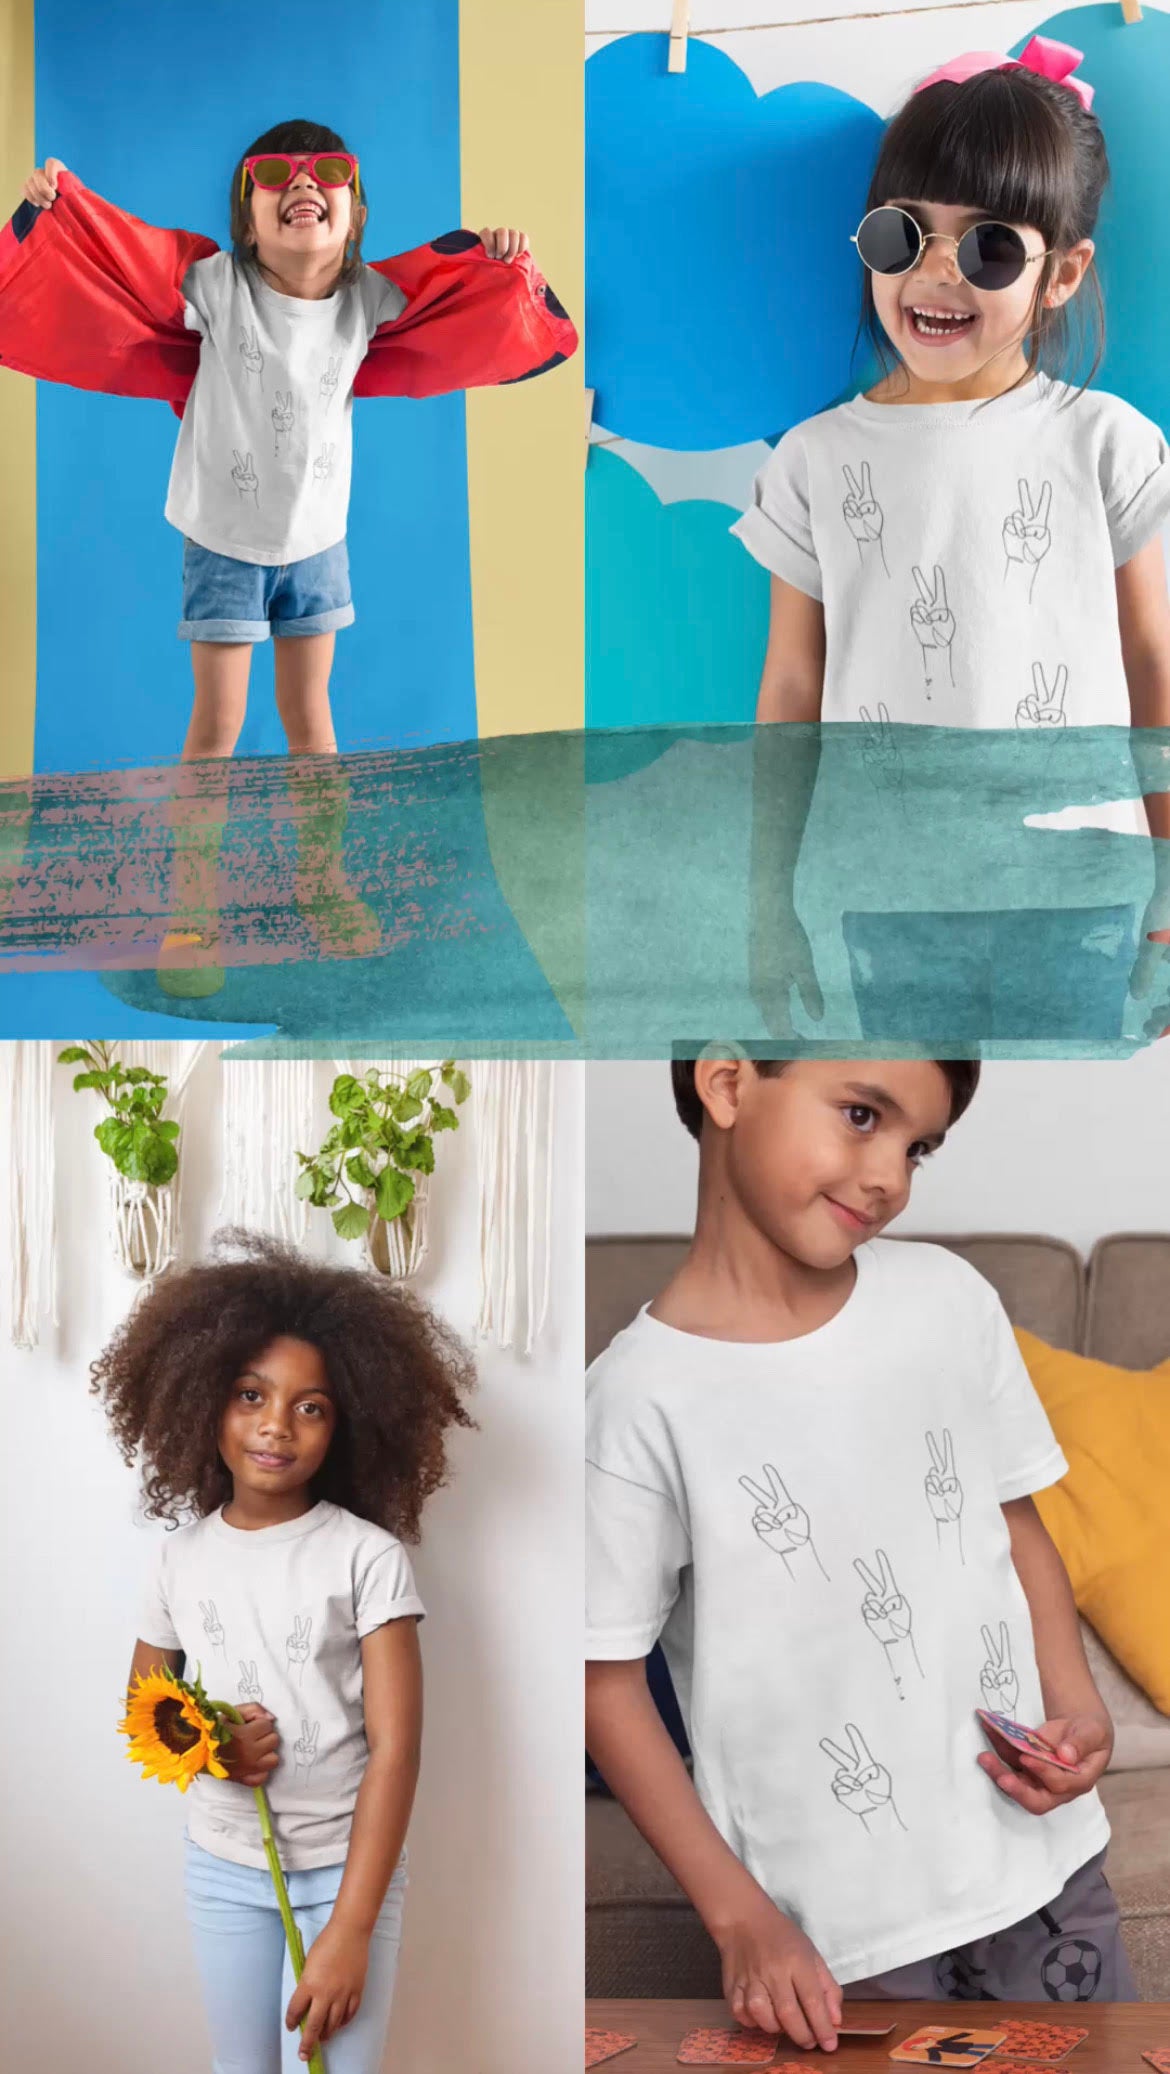 The Manifest Peace Tee - Toddler